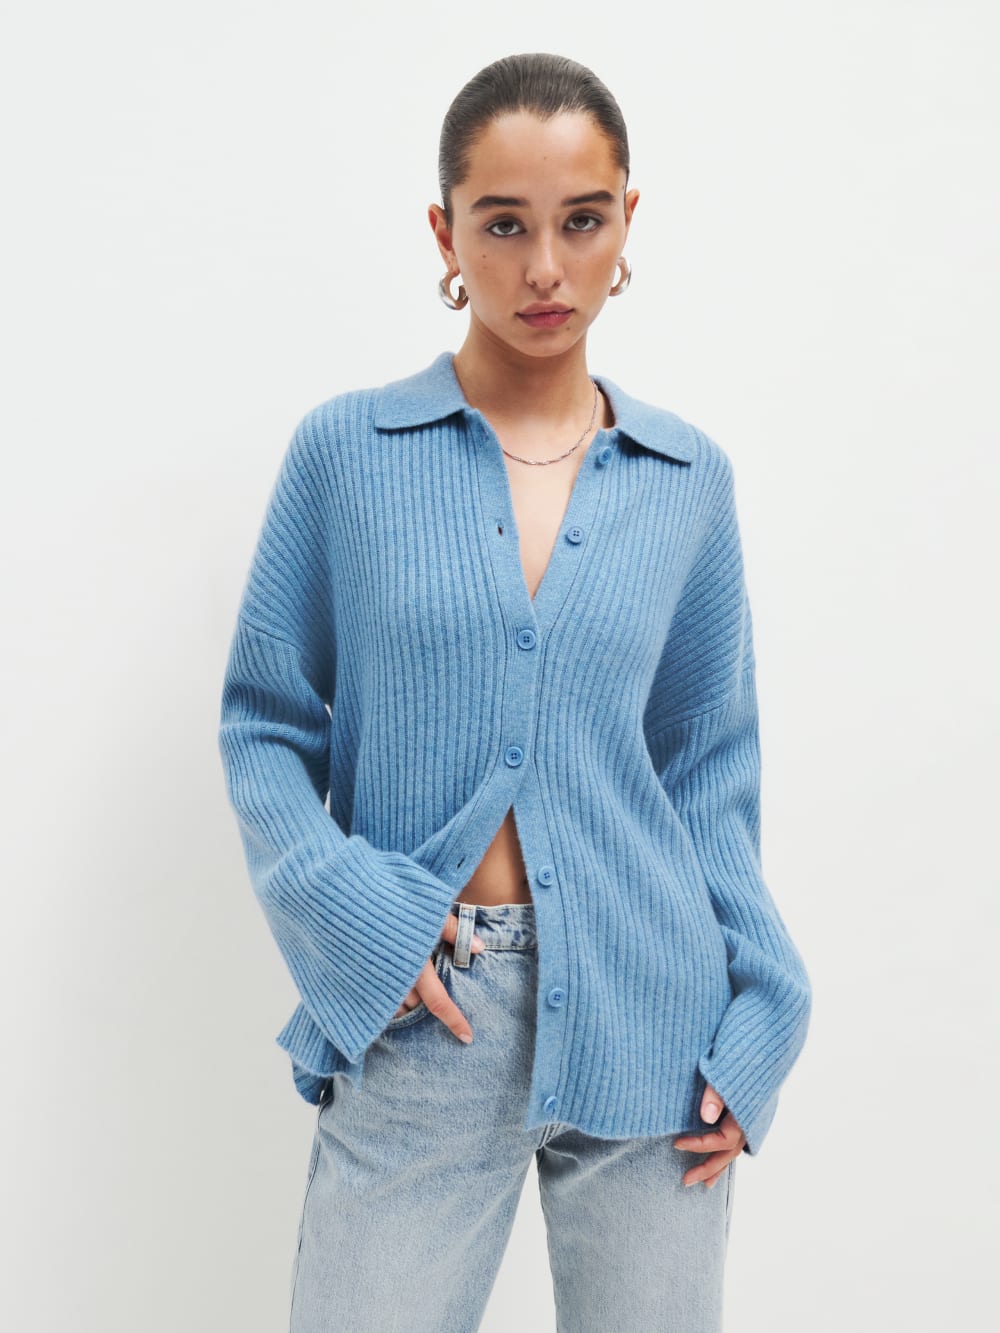 Reformation Fantino cashmere collard cardigan in pale blue with Dropped shoulders, and front buttons.